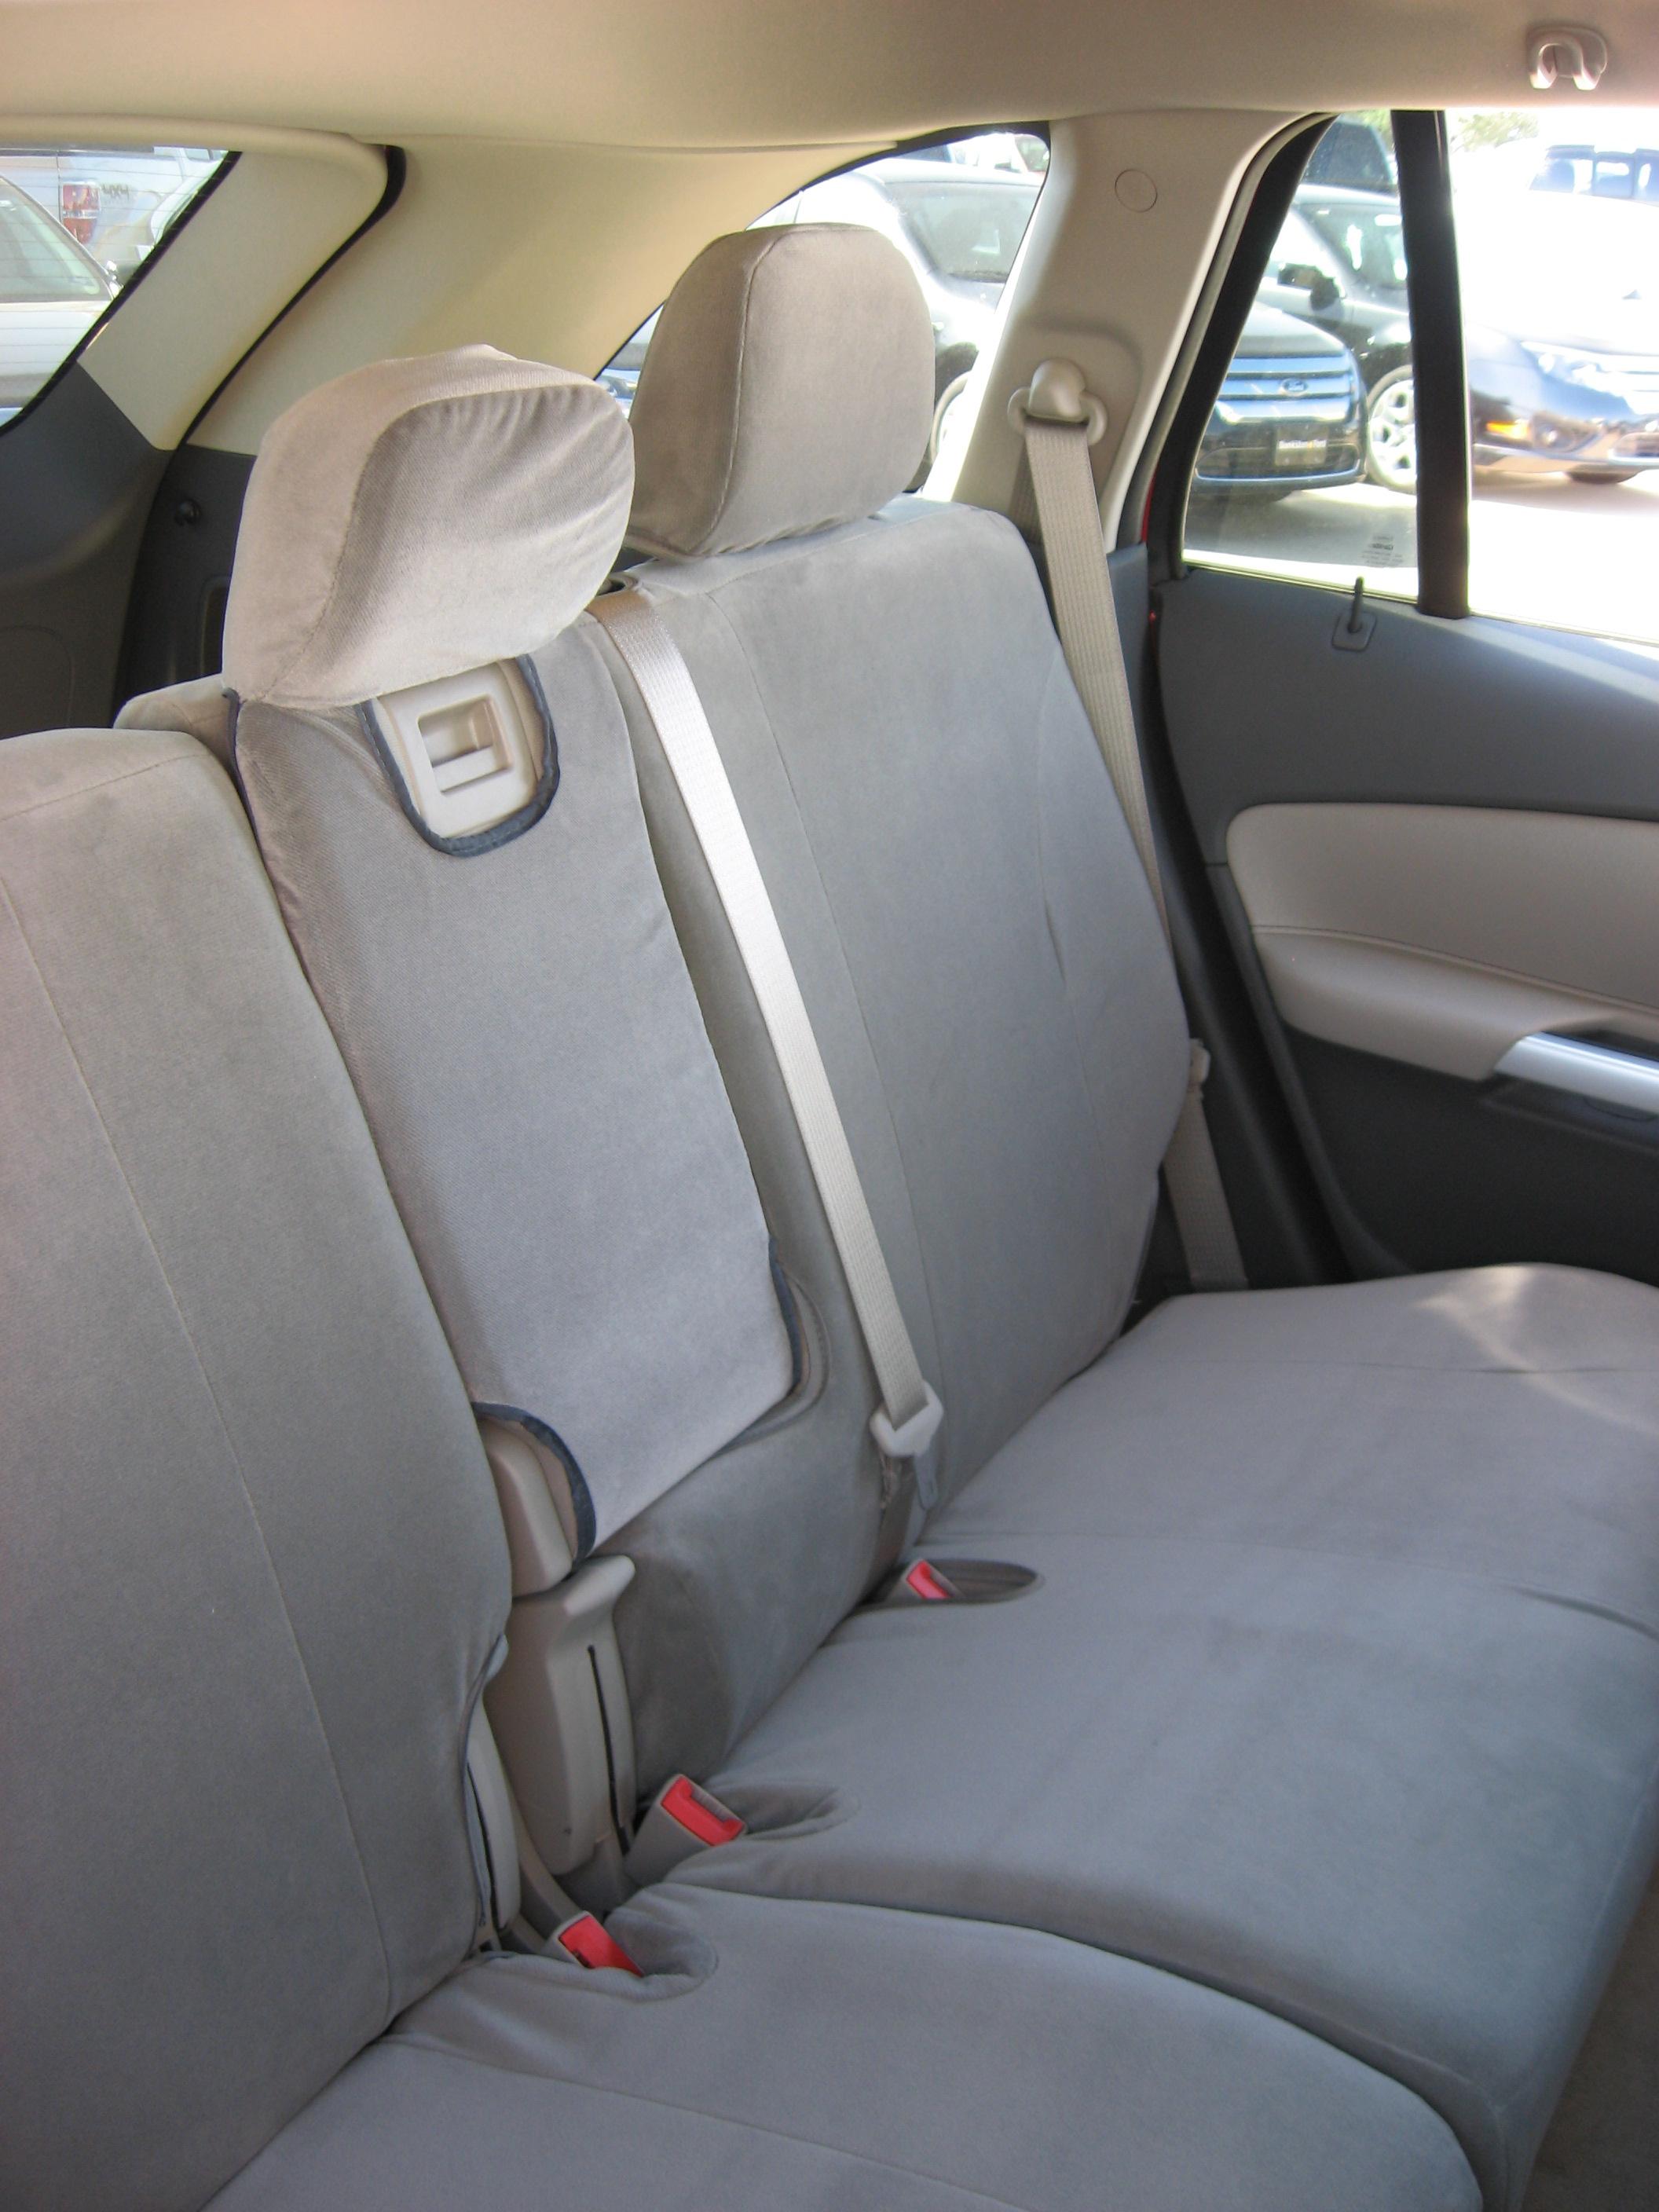 2011-2013 Ford Edge Rear 60/40 Split Seat with Integrated Armrest | Durafit Covers | Custom Fit Seat Covers For A 2013 Ford Edge